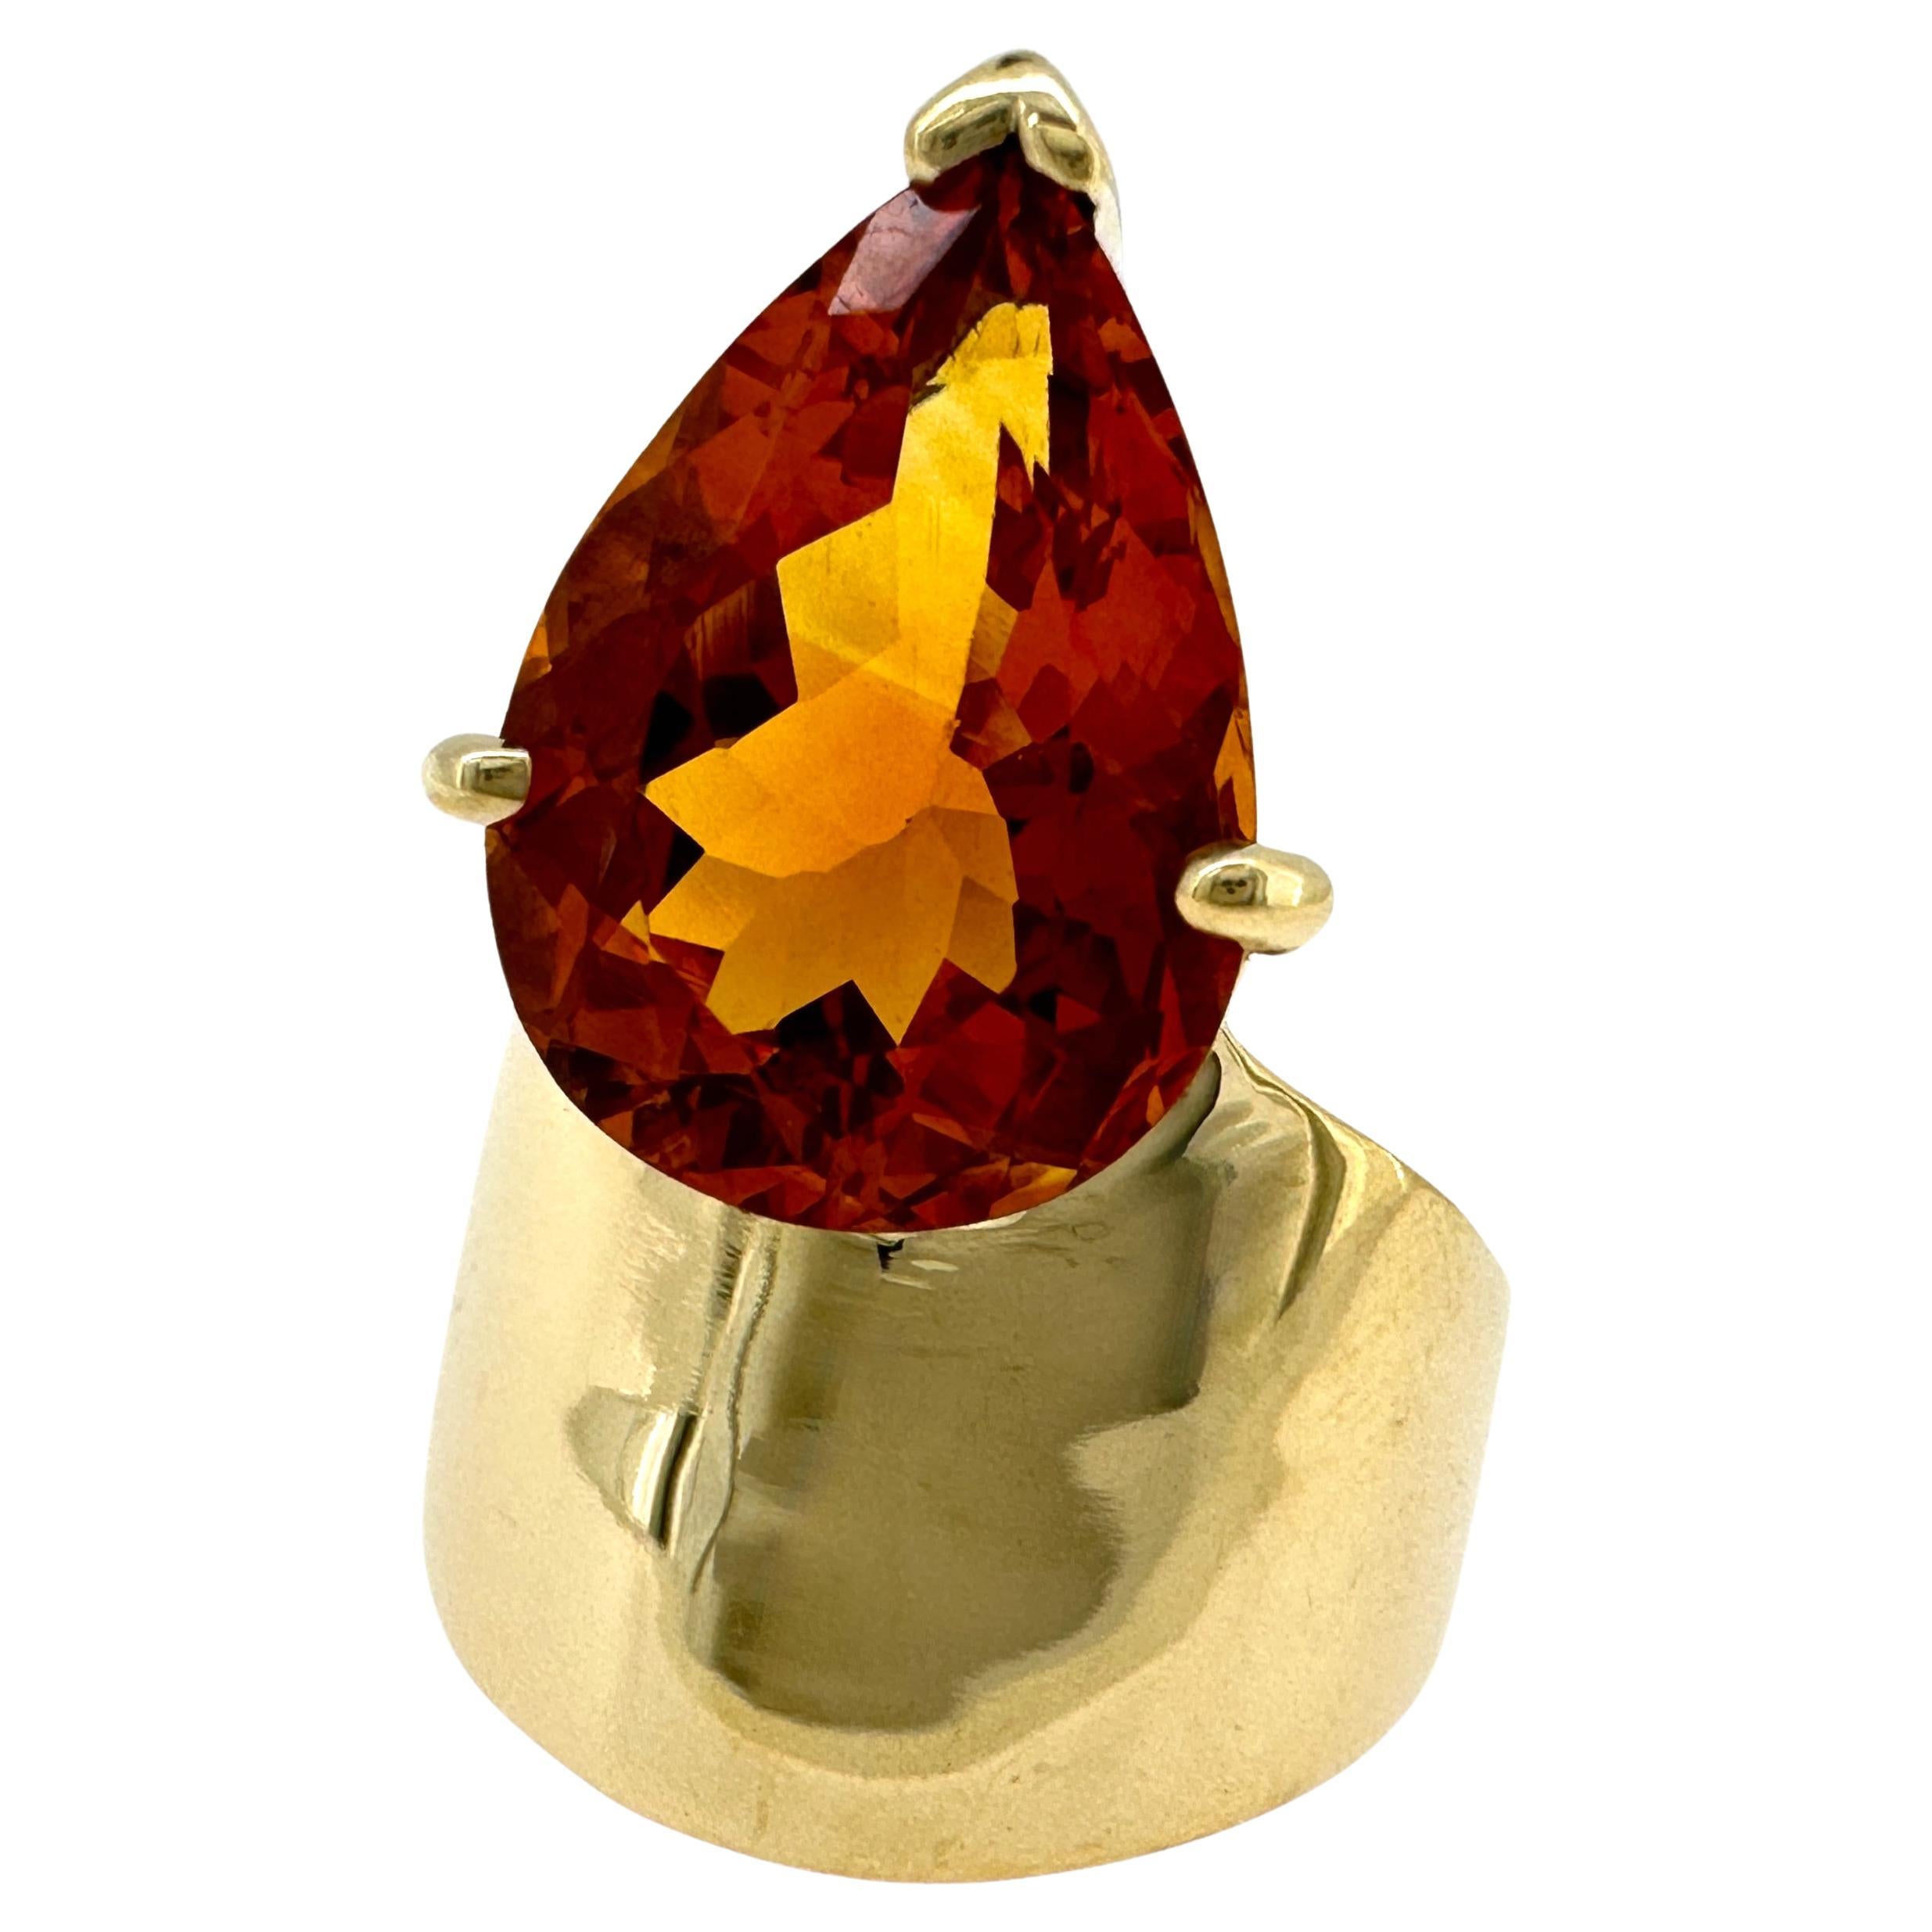 "Citrine Sailboat" Ring in Yellow Gold with Pear-Shaped 7 Carat Madeira Citrine